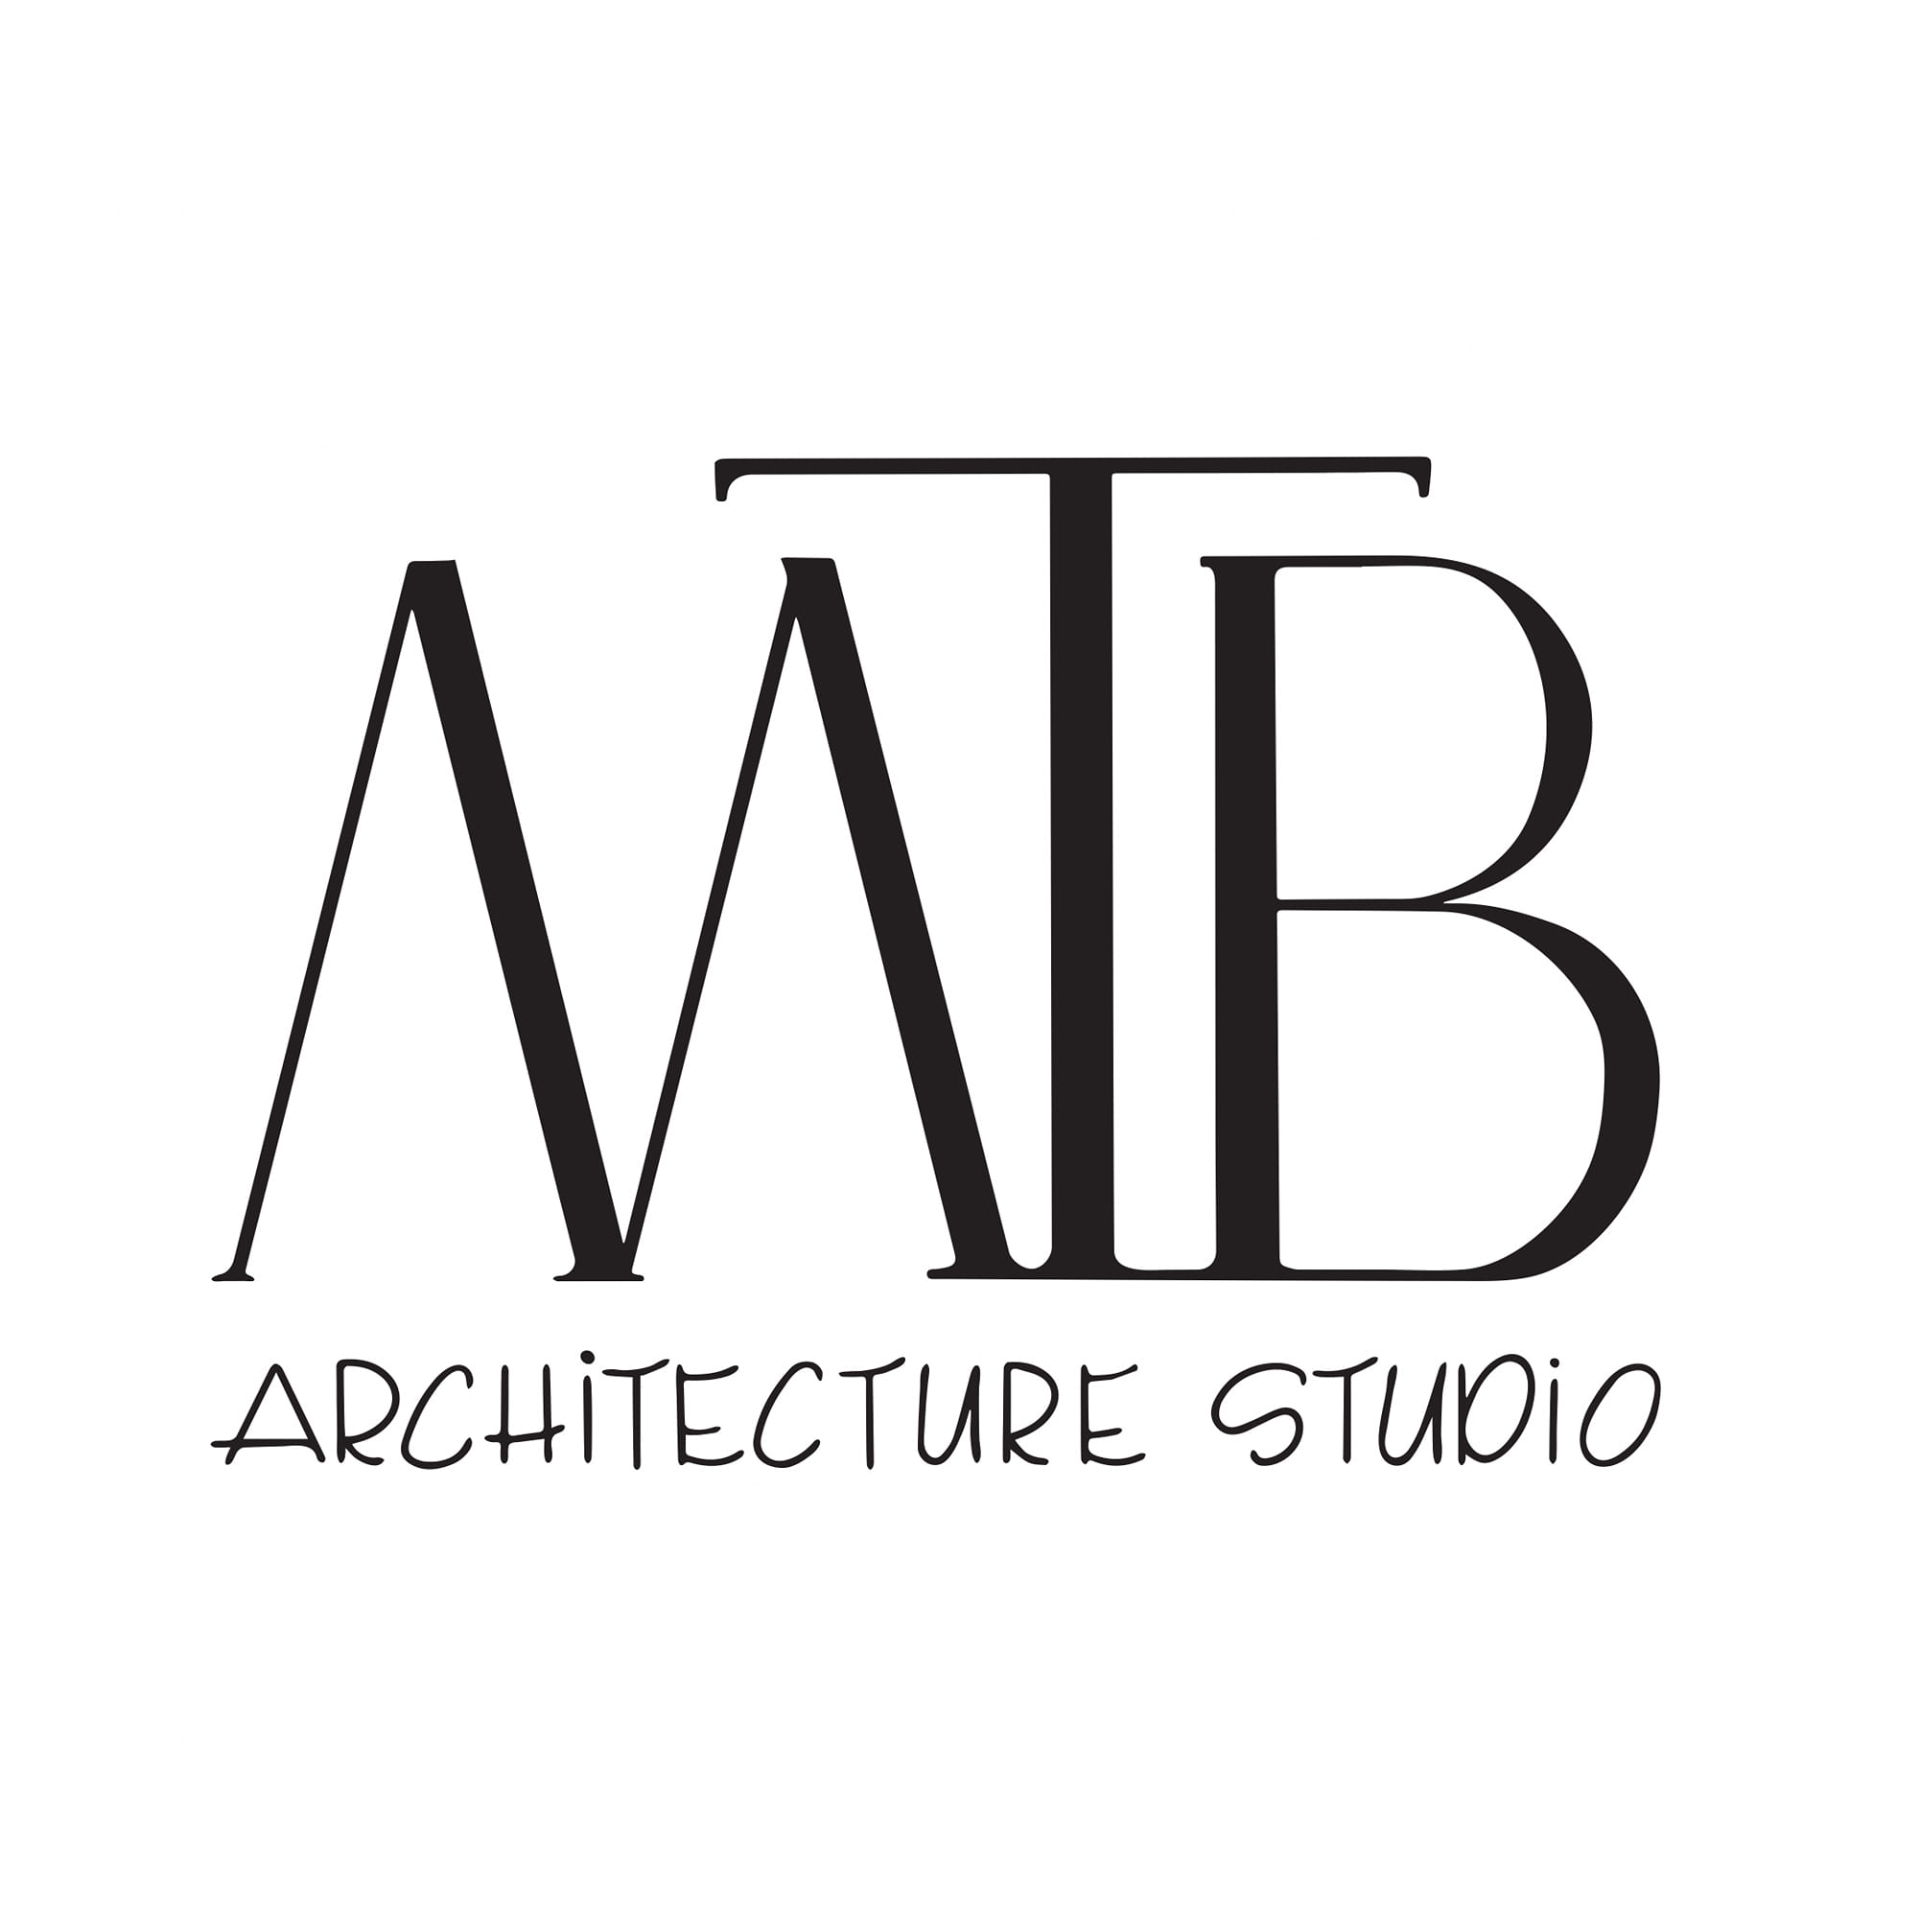 More Than Buildings Architecture and Design Studio|Legal Services|Professional Services